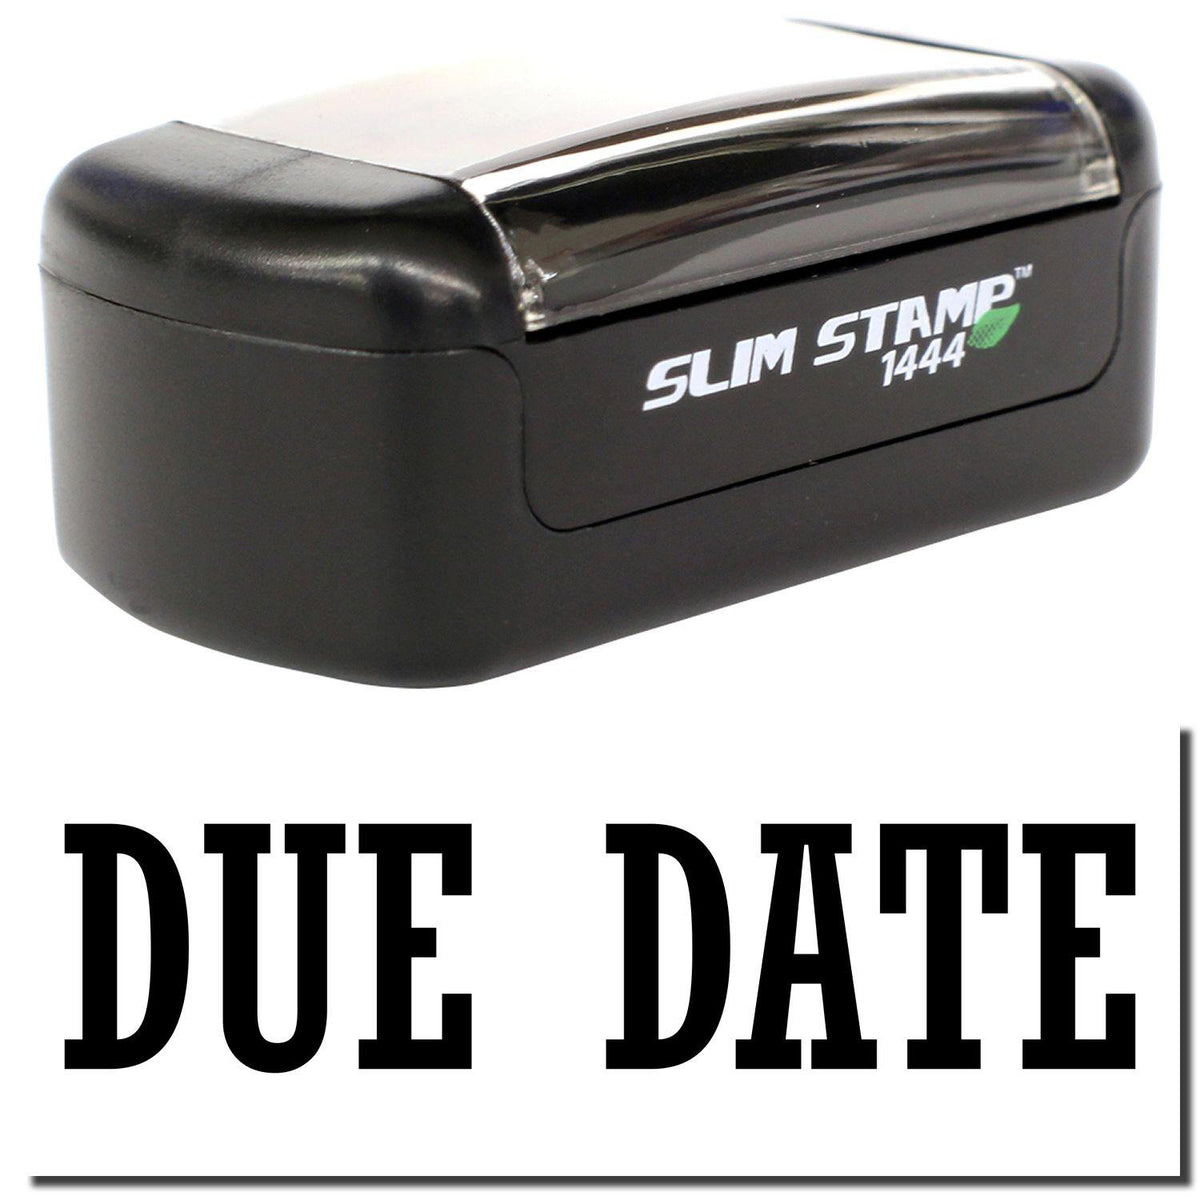 A stock office pre-inked stamp with a stamped image showing how the text &quot;DUE DATE&quot; is displayed after stamping.